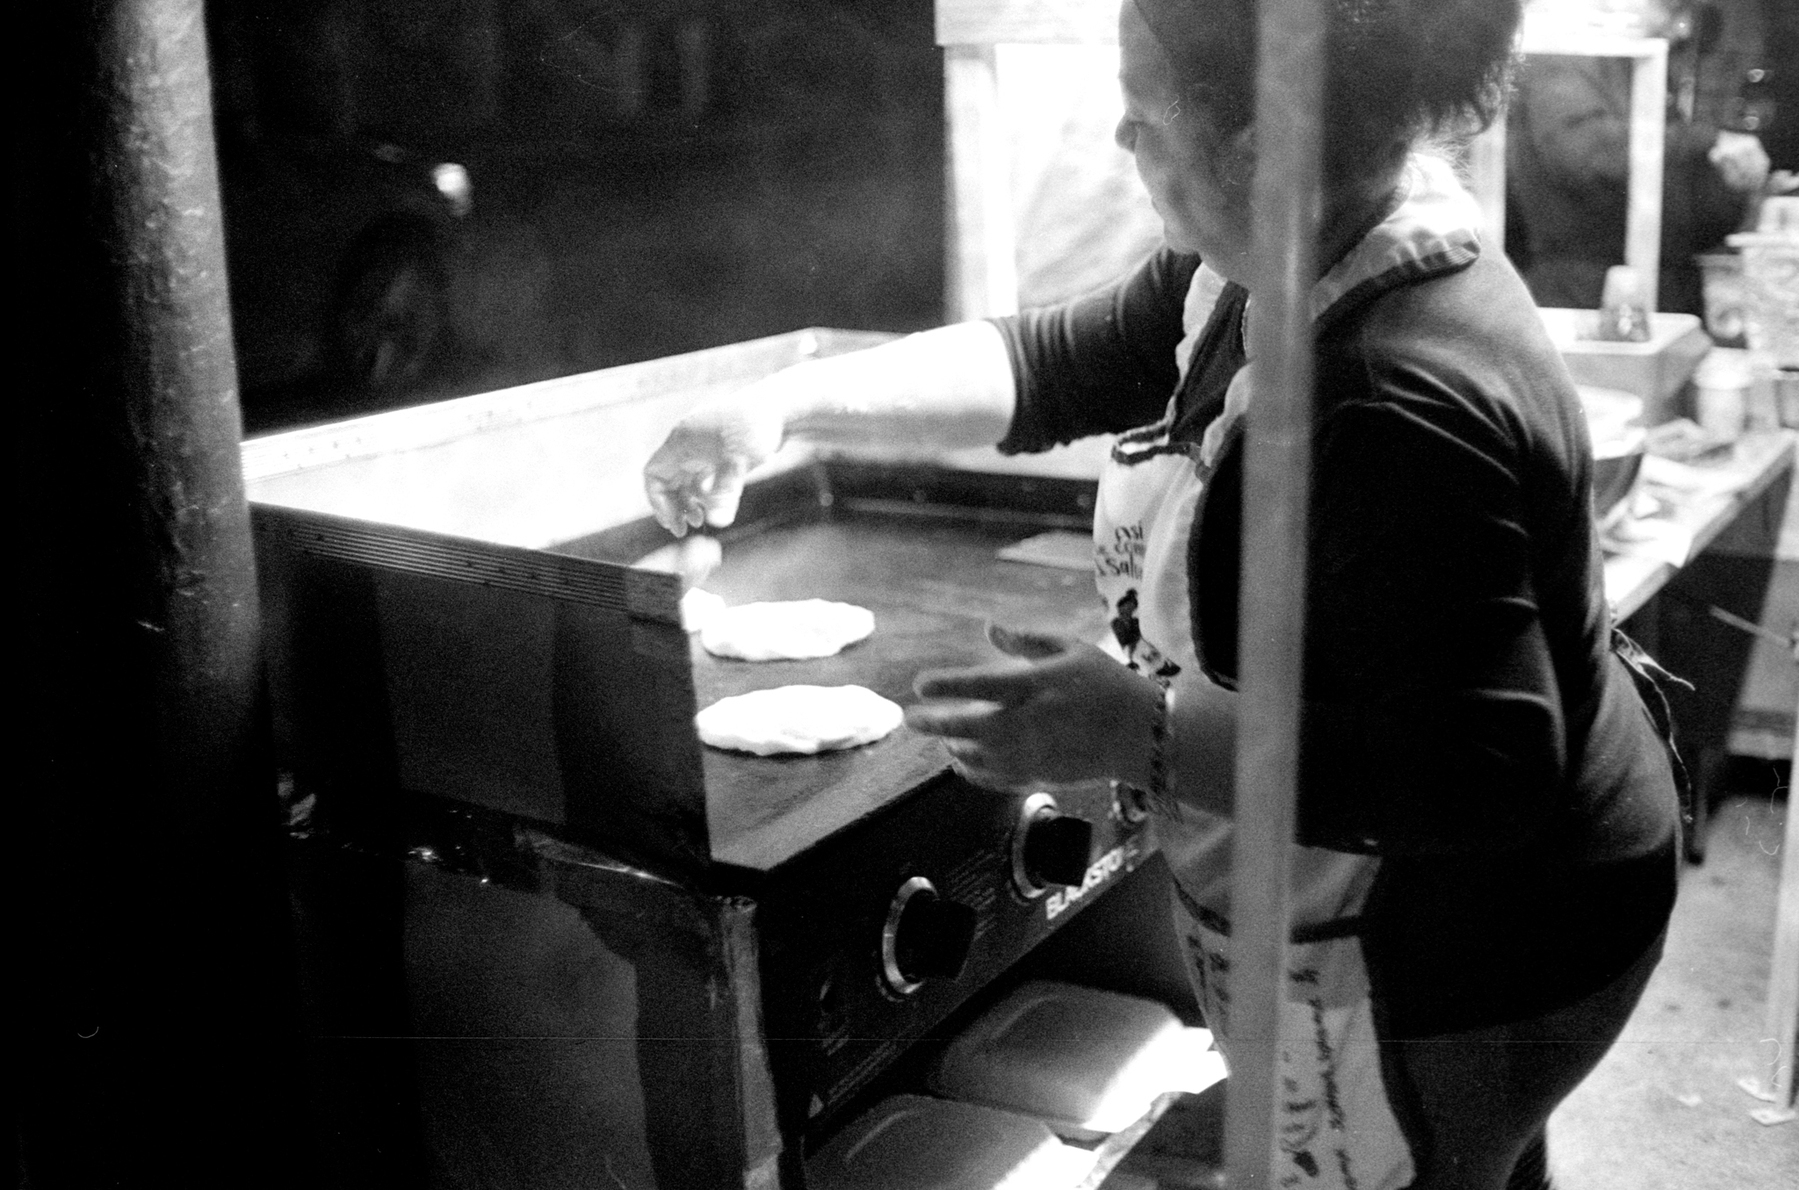 a scan of a black and white photo showing showing a lady cooking pupusa on a flat grill